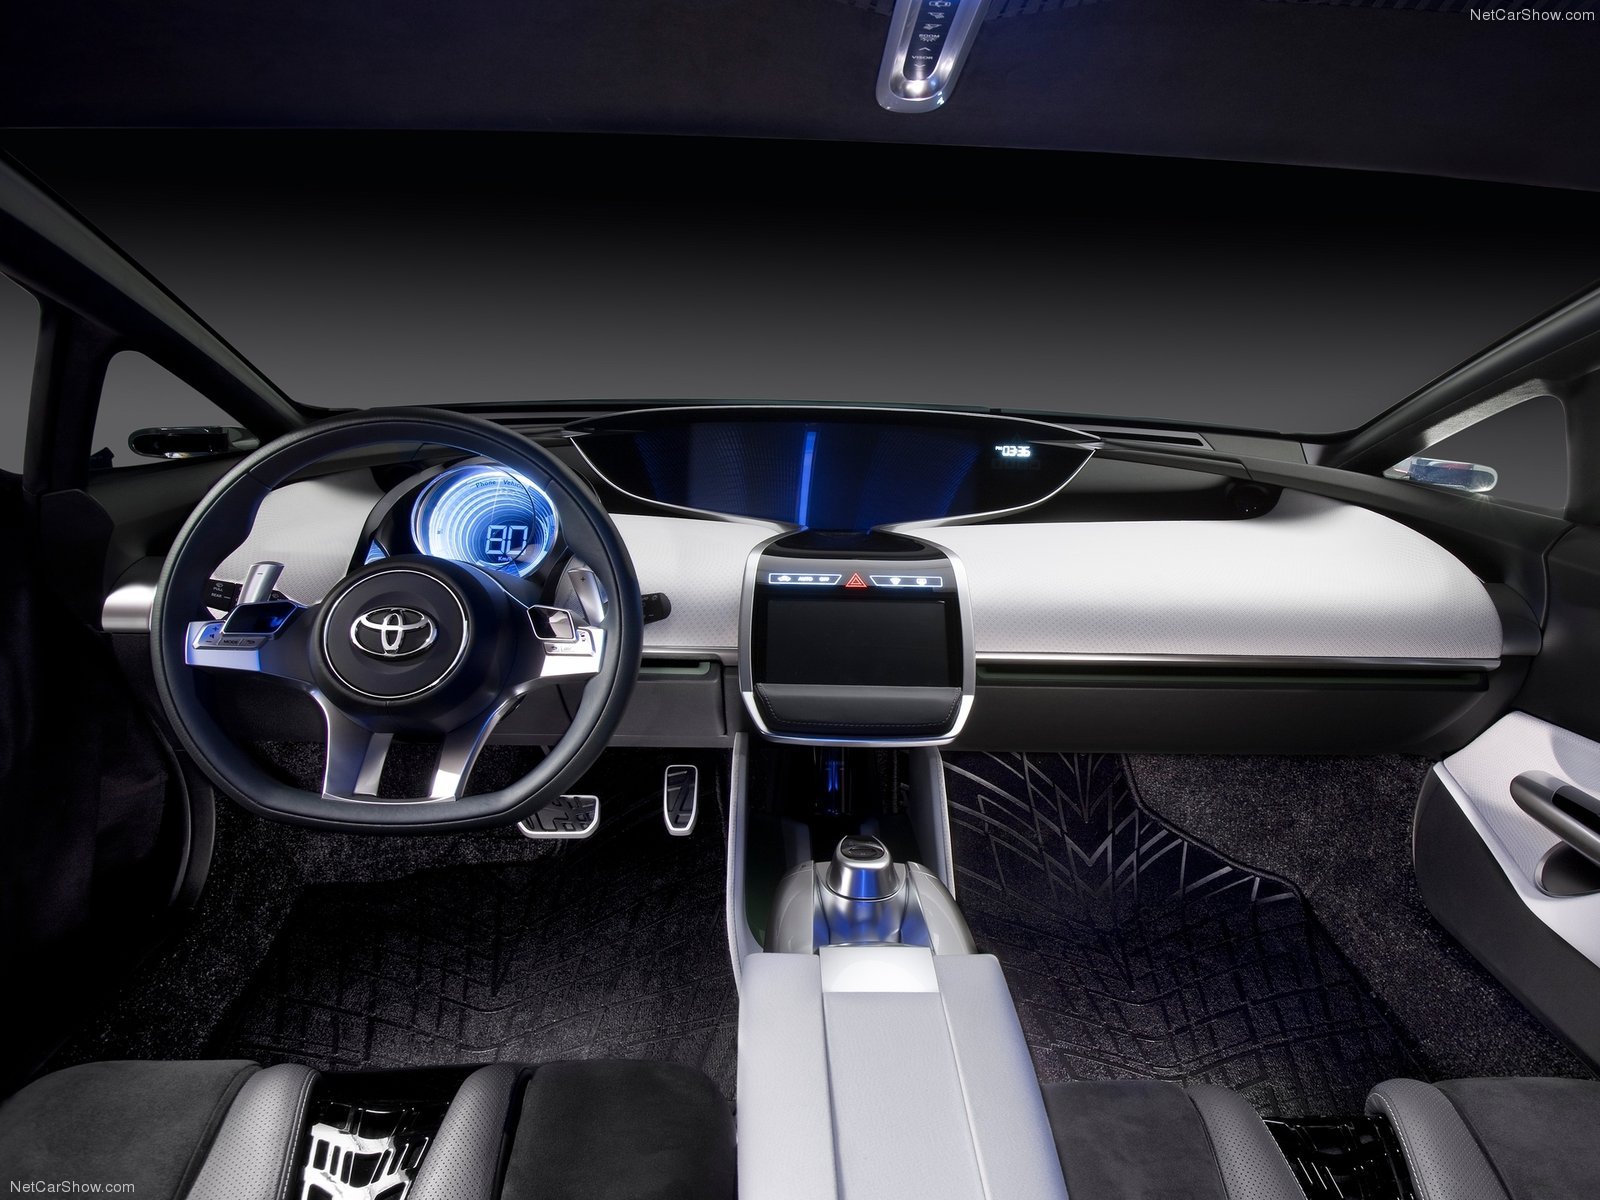 toyota, Ns4, Advanced, Plug in, Hybrid, Concept, Cars, 2012 Wallpaper